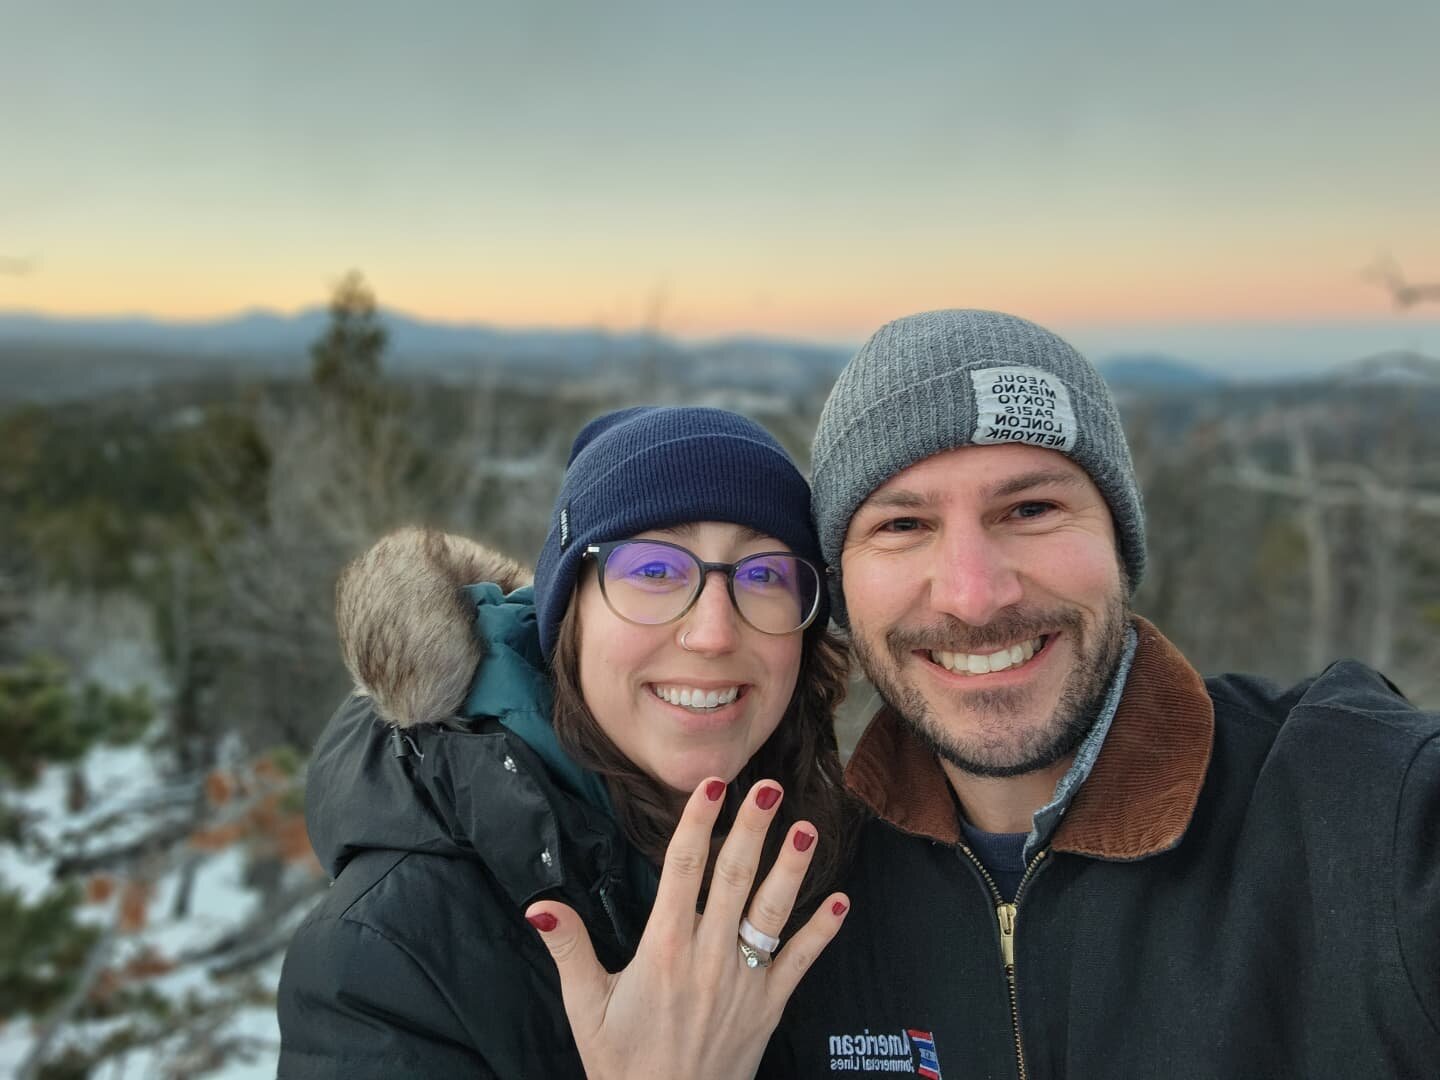 Luke planned the BEST winter weekend getaway, and little did I know he had something else up his sleeve, too! We're engaged!